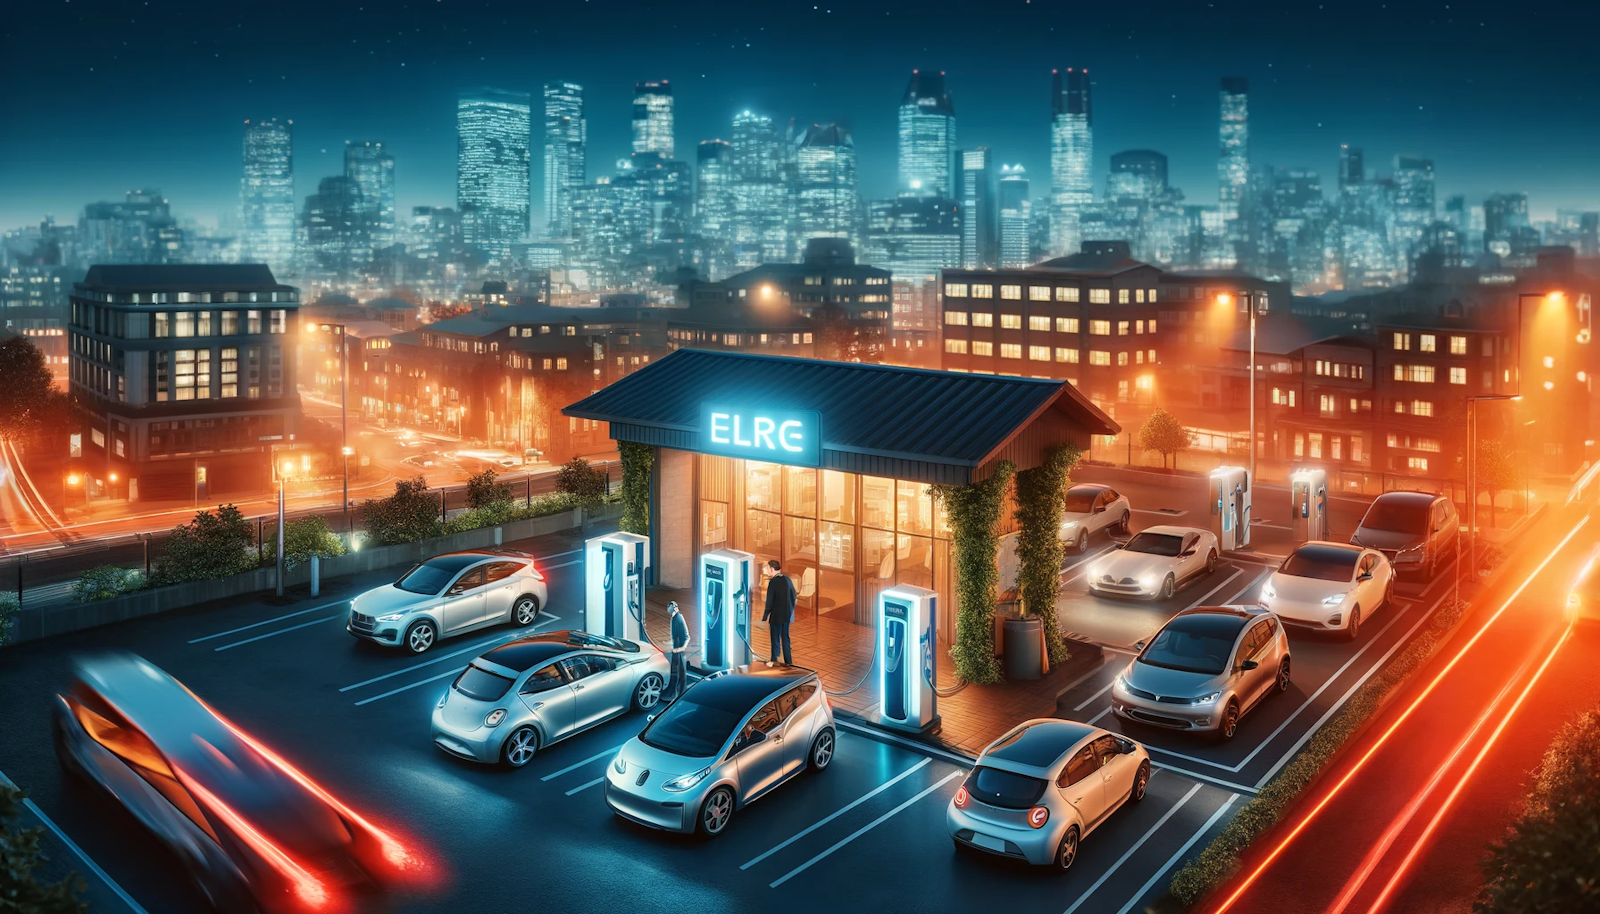 Evening scene at an electric vehicle charging station in a bustling city, illuminated by energy-efficient lighting, with electric cars charging and people engaging in conversation, highlighting the integration of electric mobility into urban life.